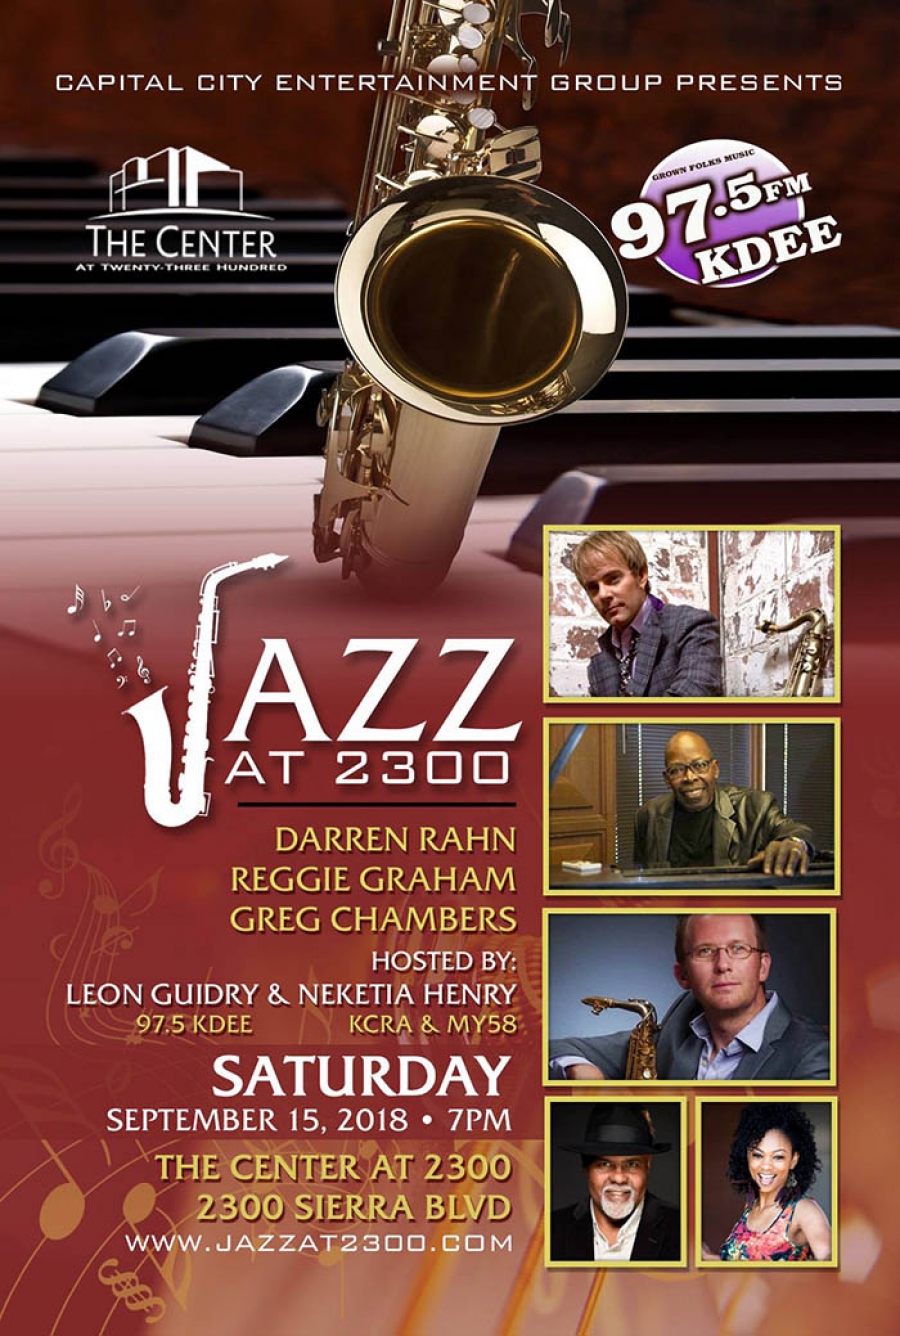 WILL YOU BE THERE? JAZZ at 2300 in Sacramento Sac Cultural Hub